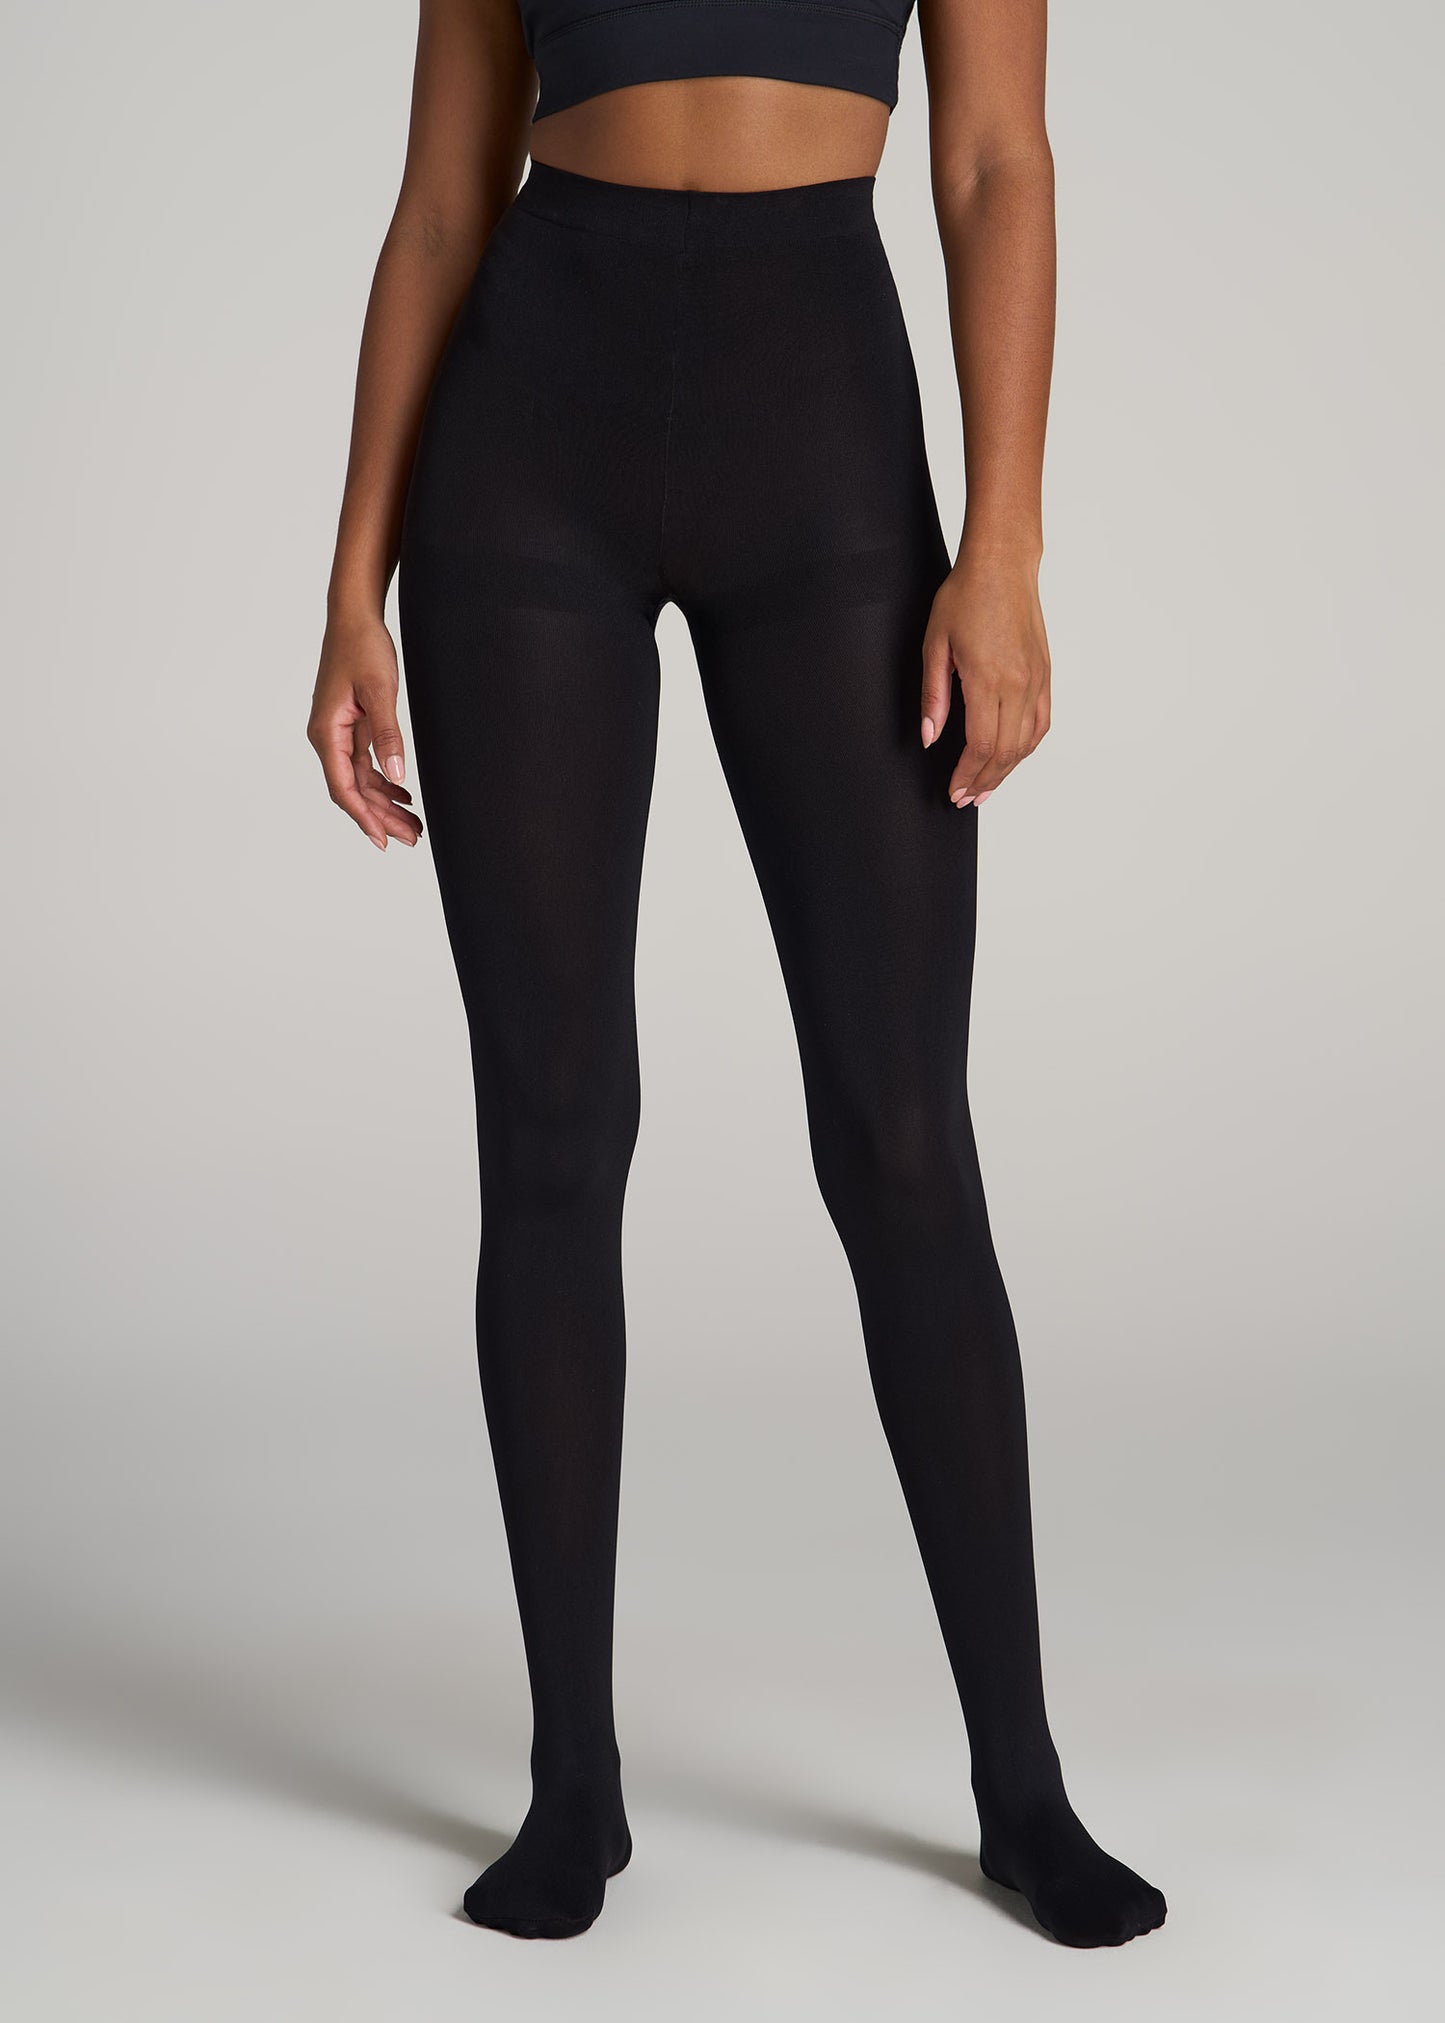 Tights for Tall Women